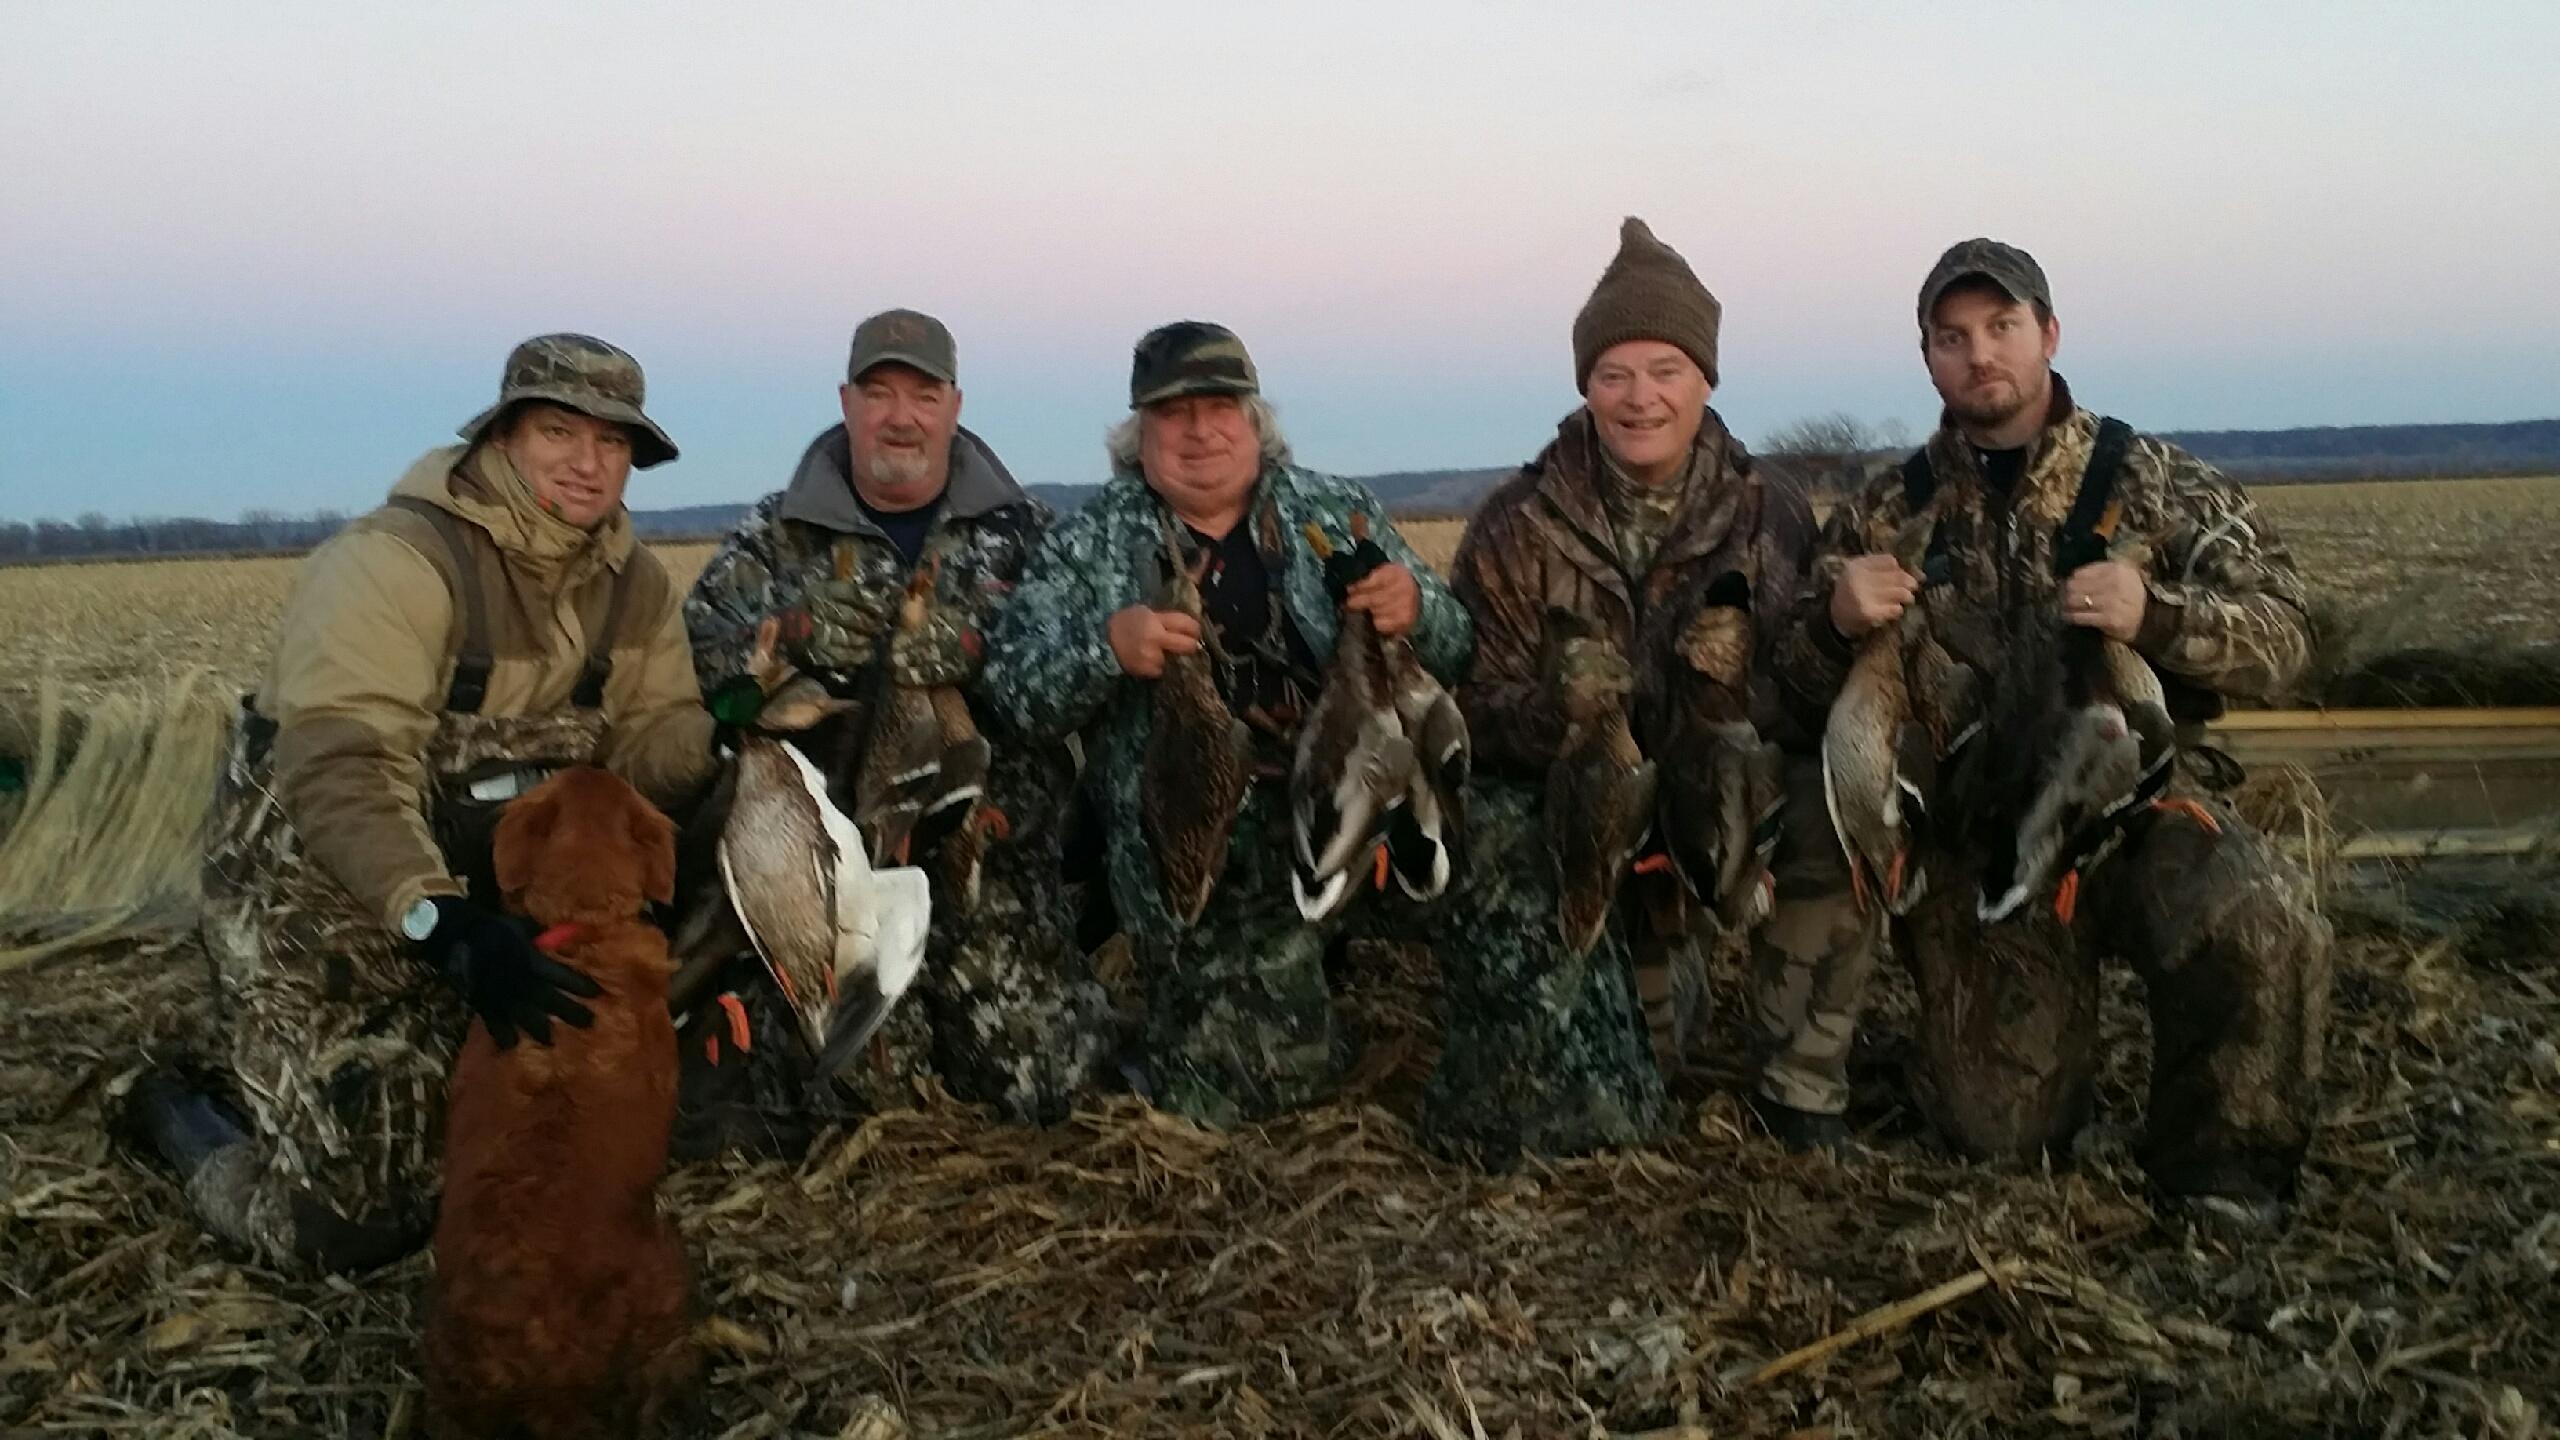 Fully Guided Duck Hunts - Mound City, Missouri